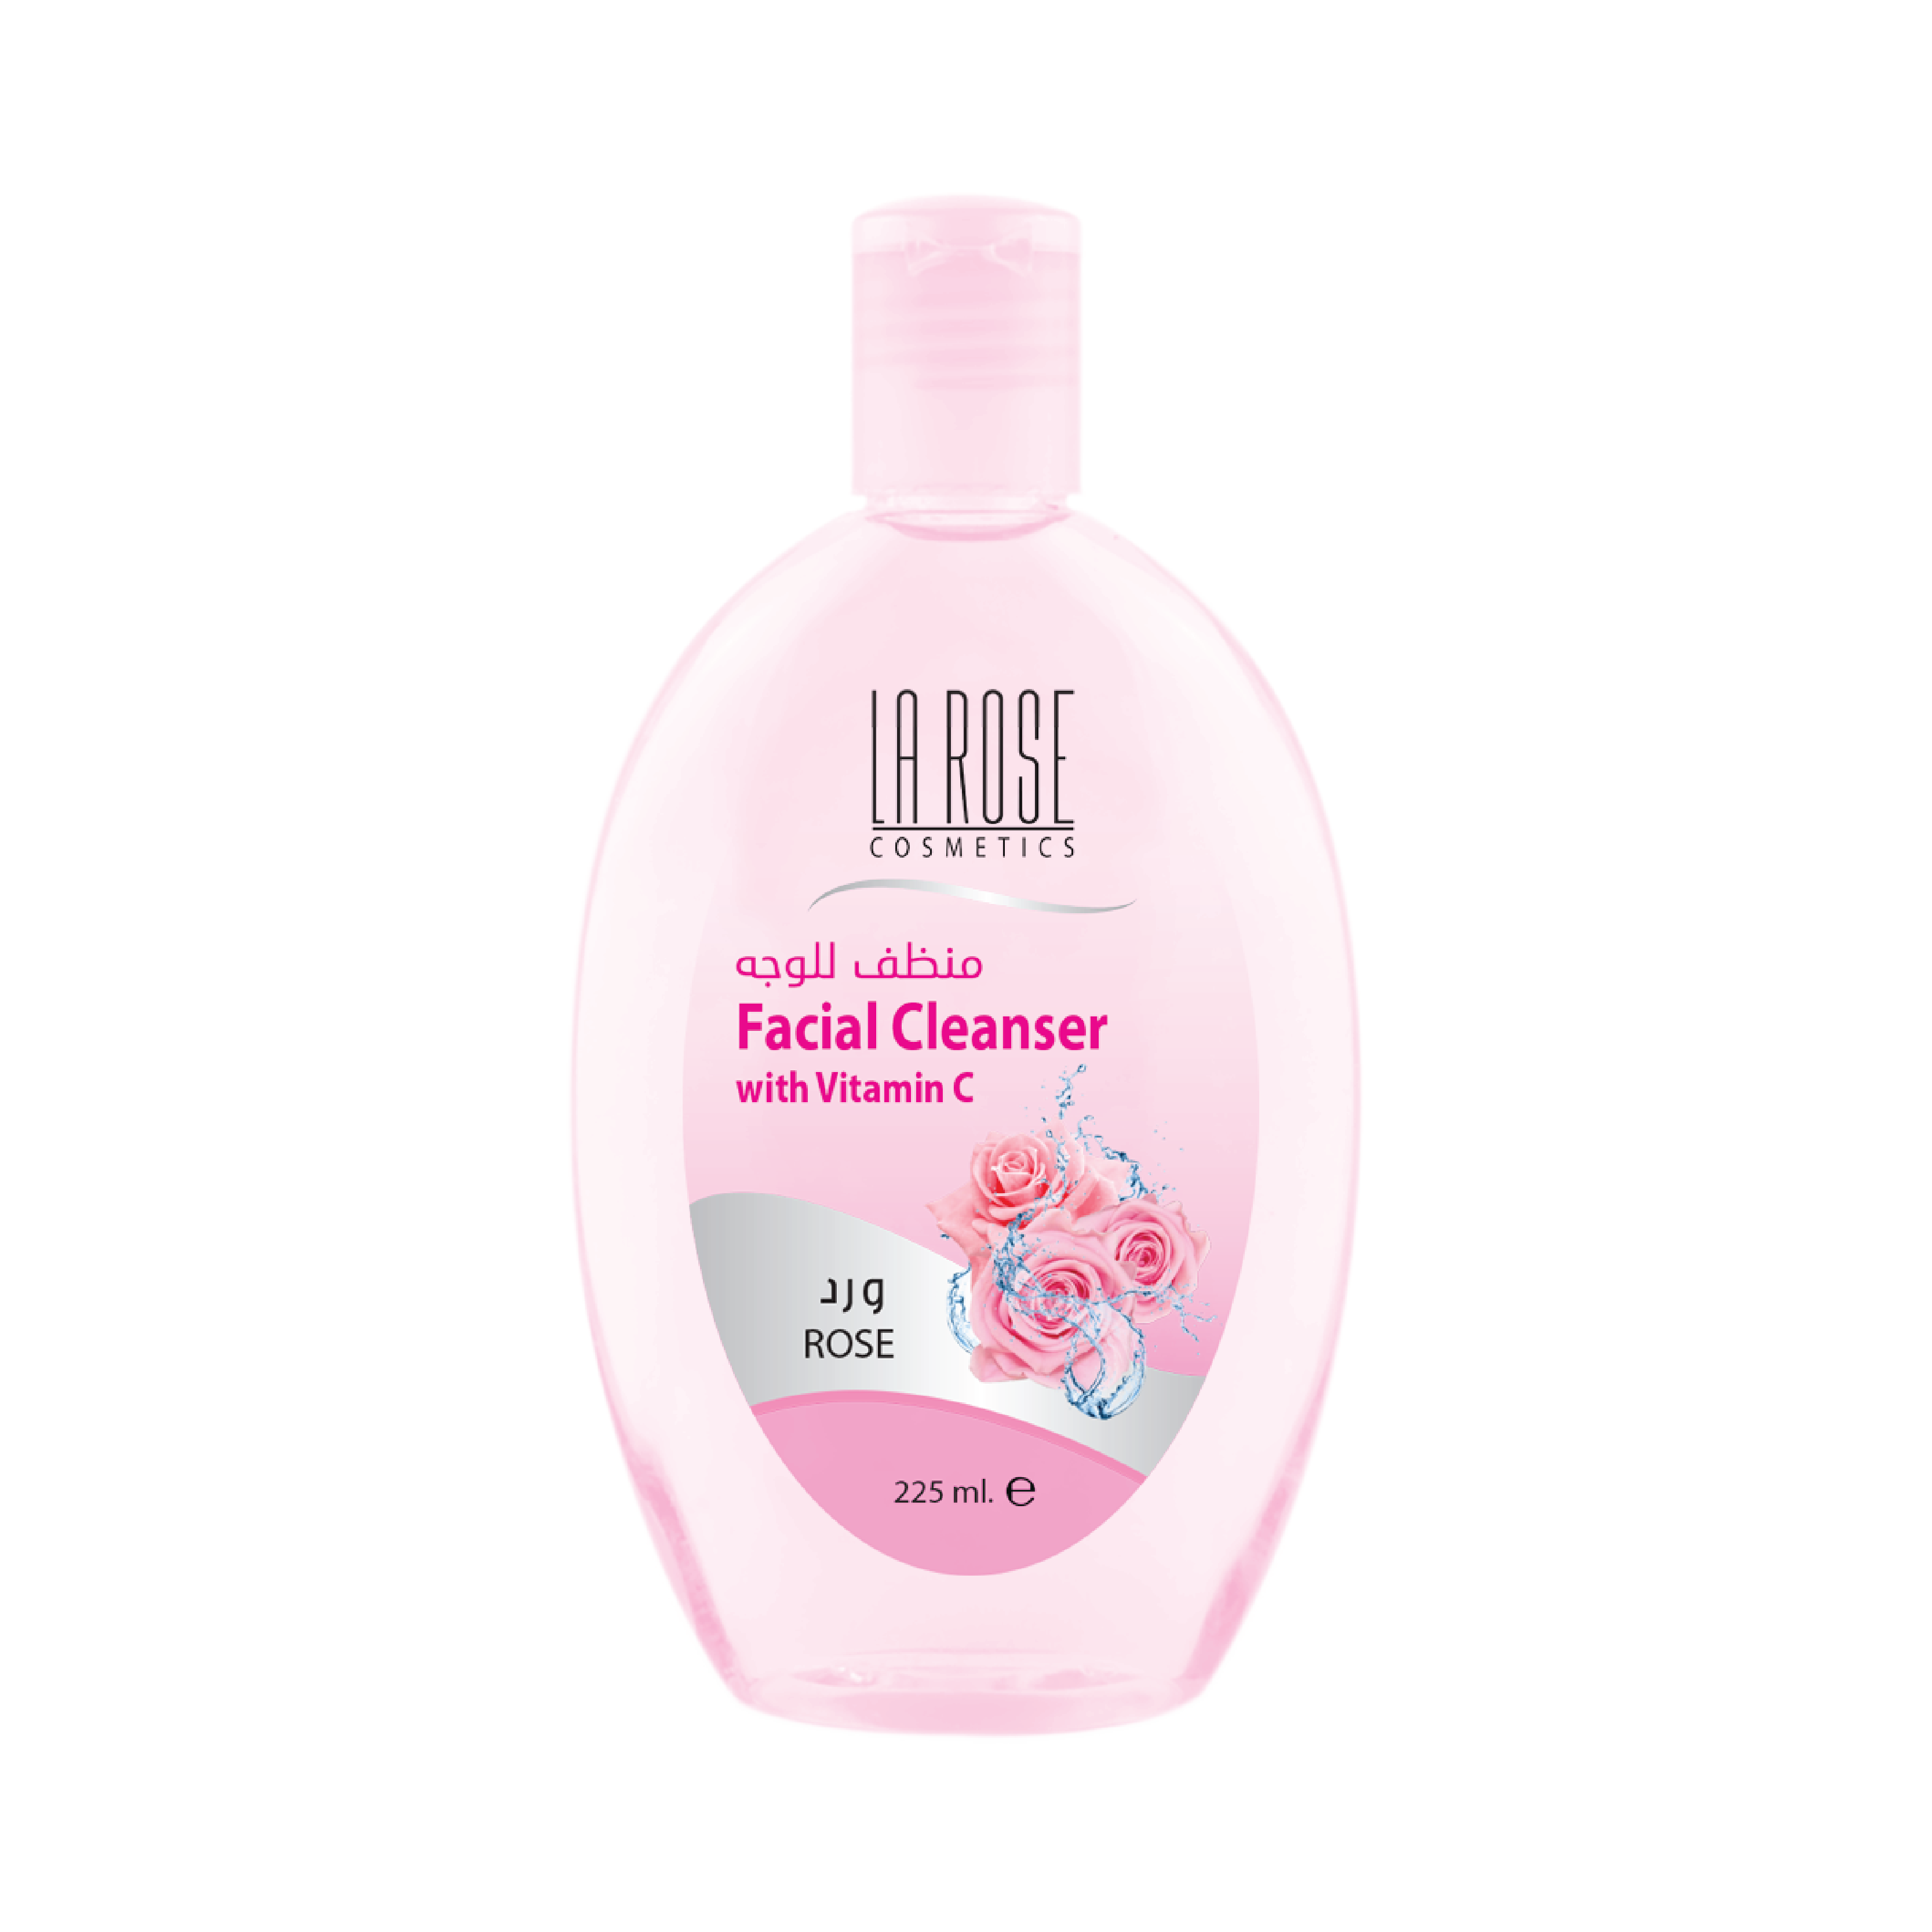 Nourish Your Skin with La Rose Rose Facial Cleanser